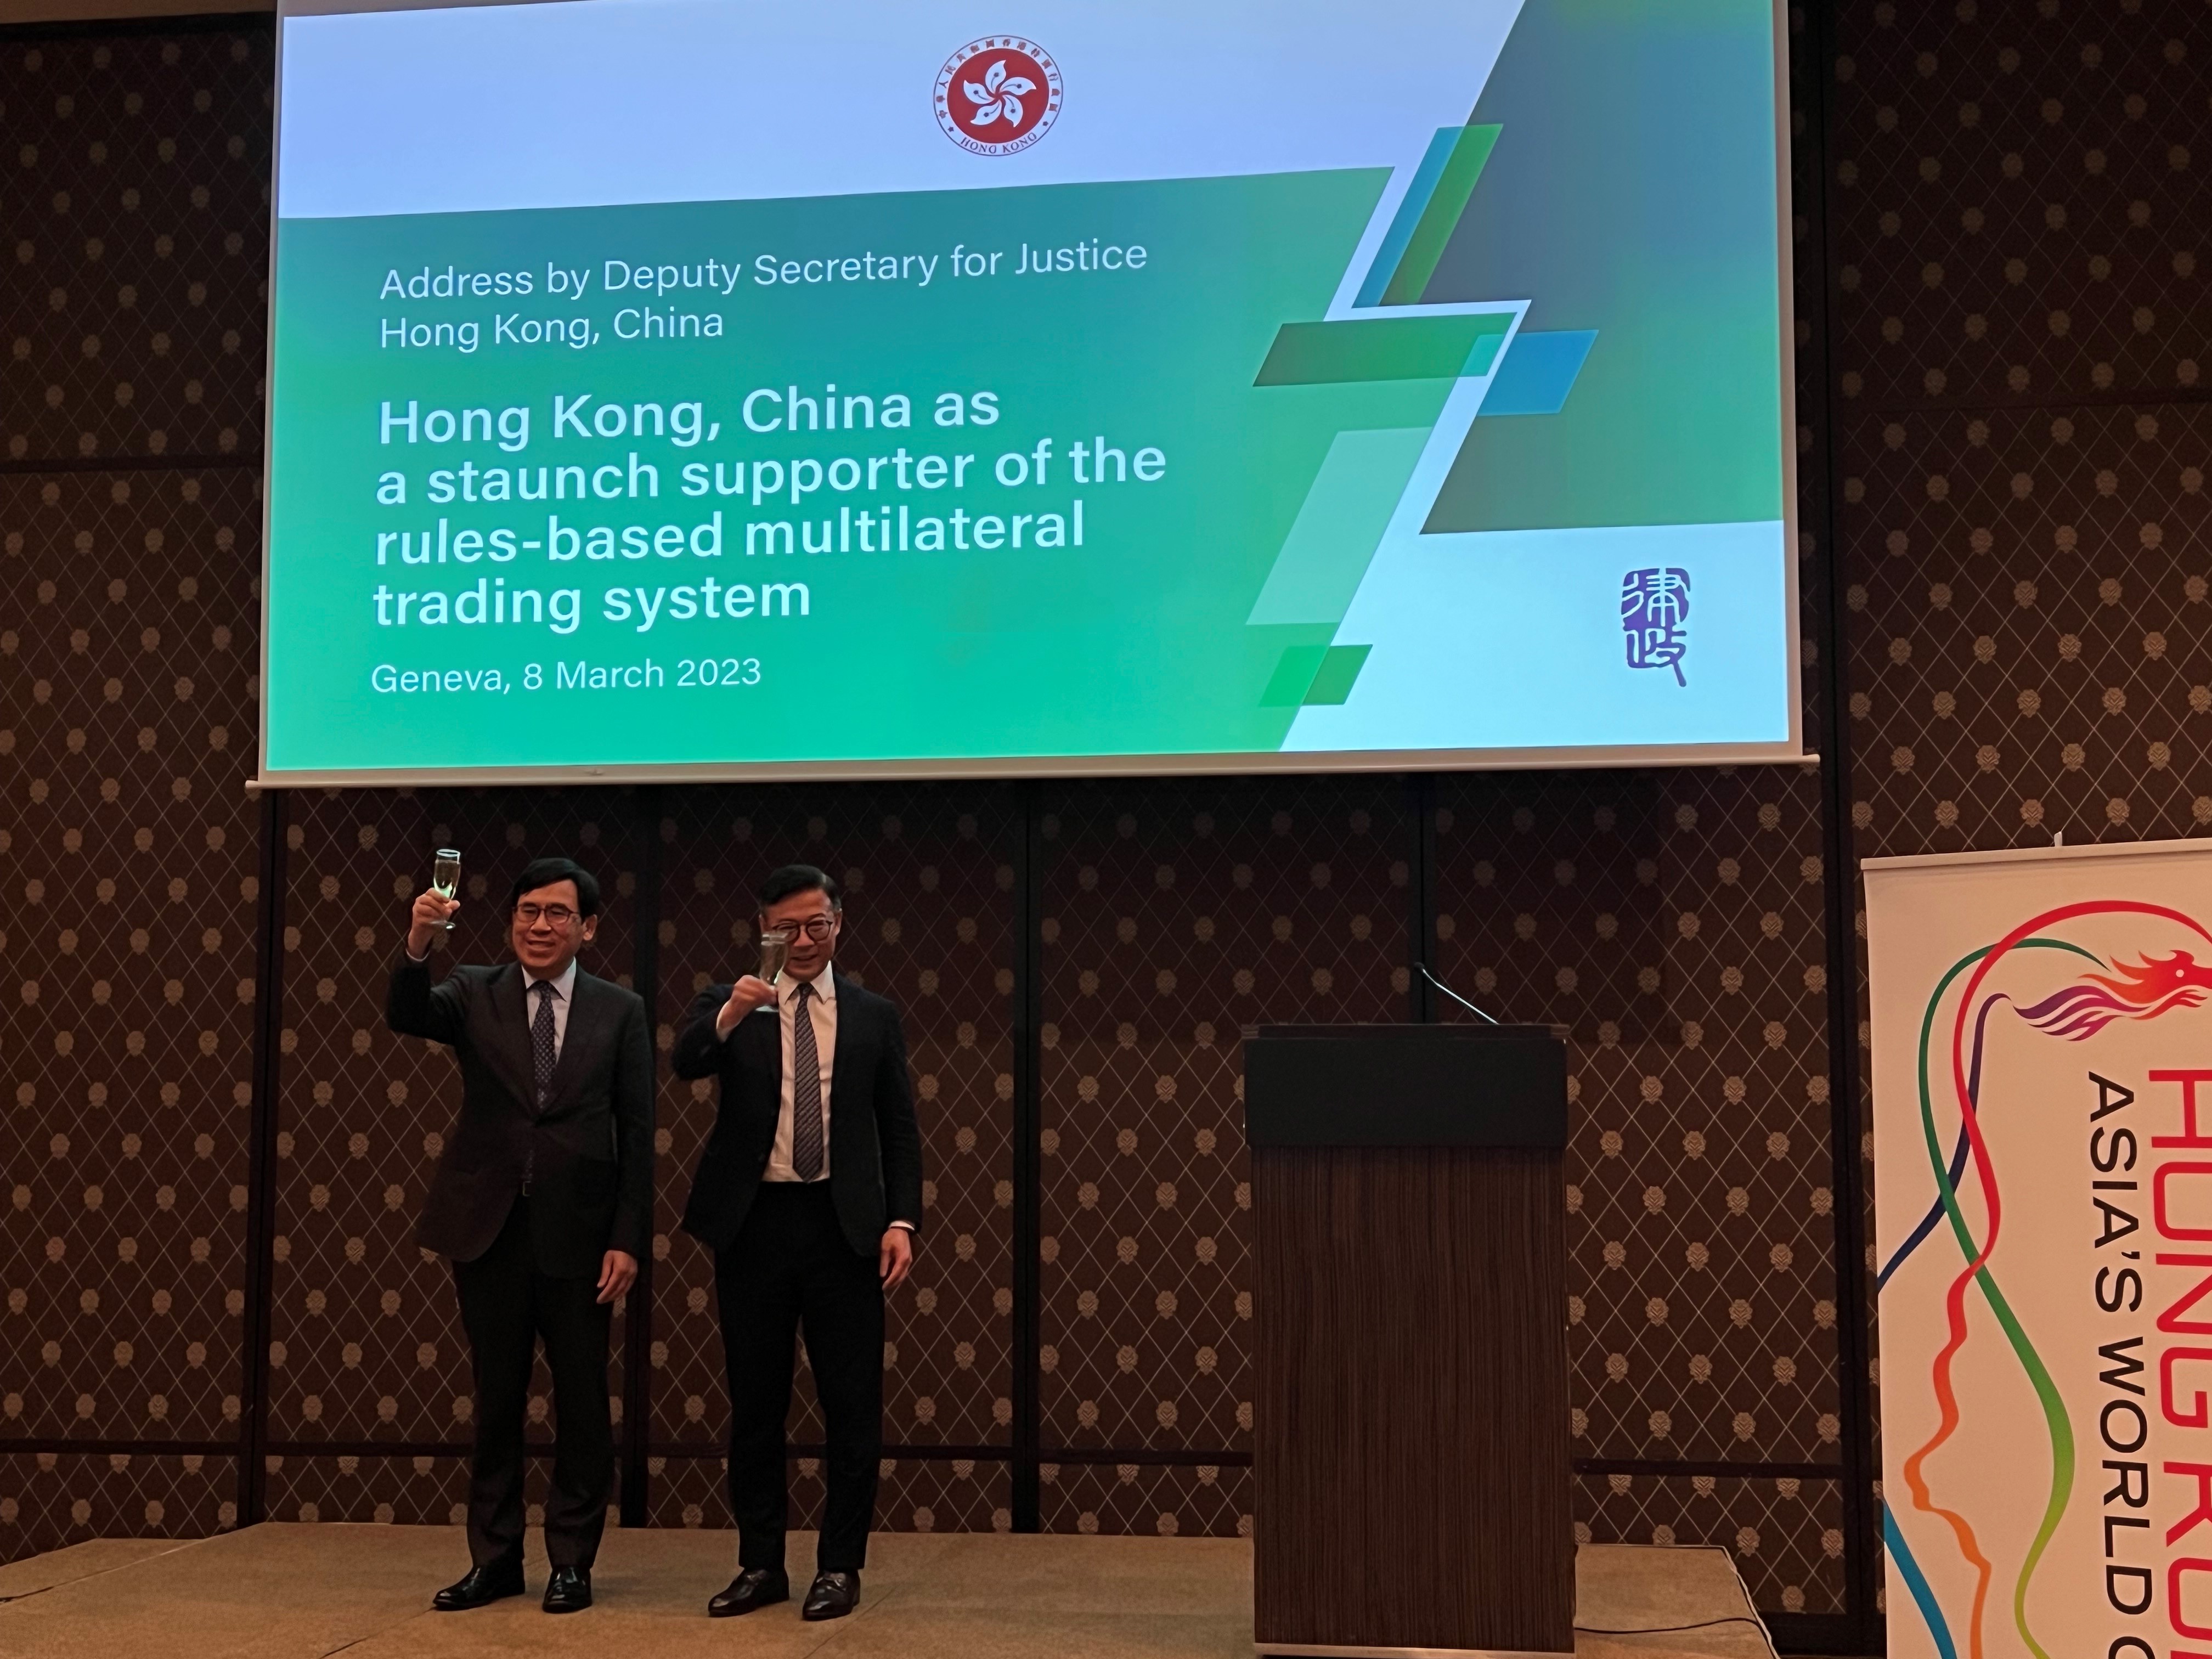 The Deputy Secretary for Justice, Mr Cheung Kwok-kwan, on March 8 (Geneva time) attended in Geneva, Switzerland, a reception hosted by the Hong Kong Economic and Trade Office in Geneva. Photo shows Mr Cheung (right) and the Permanent Representative of the Hong Kong Special Administrative Region of China to the World Trade Organization, Mr Laurie Lo (left), at the toasting ceremony.